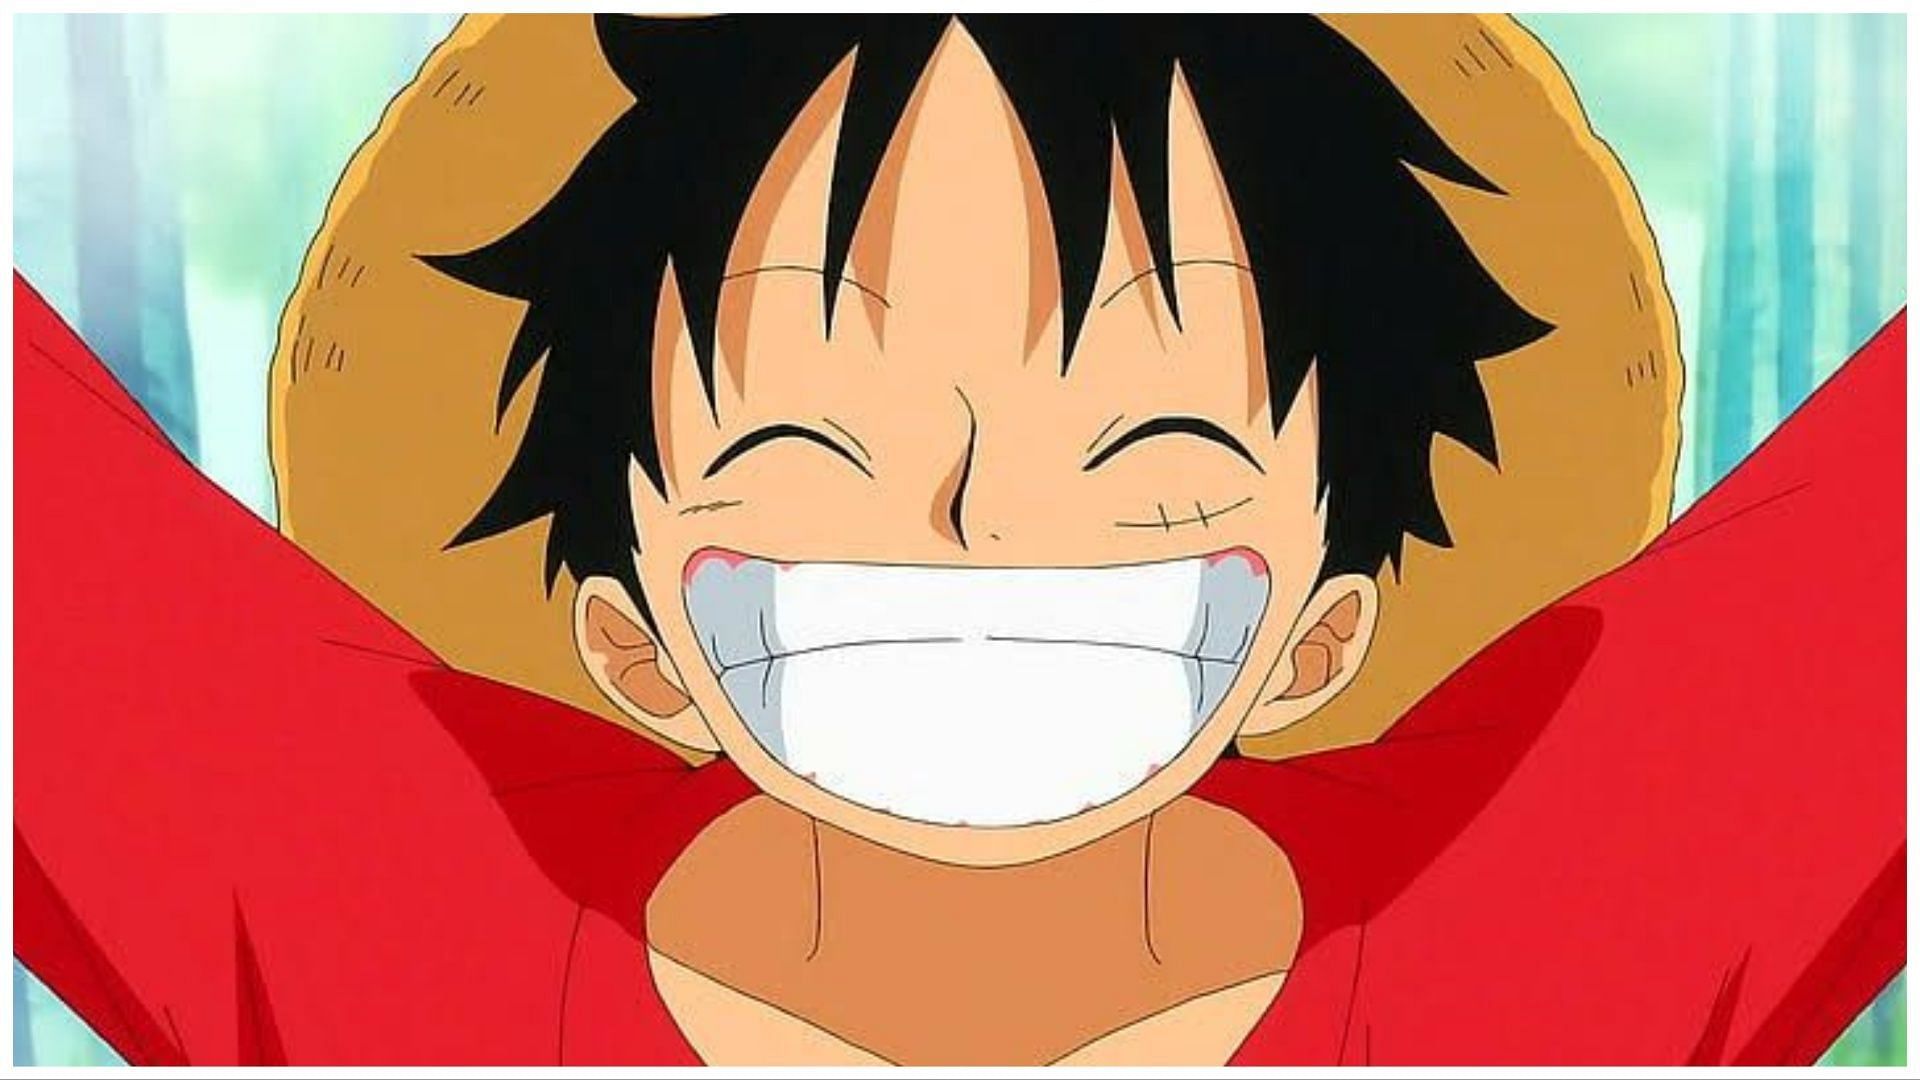 Luffy as seen in One Piece (Image Via Toei Animation)